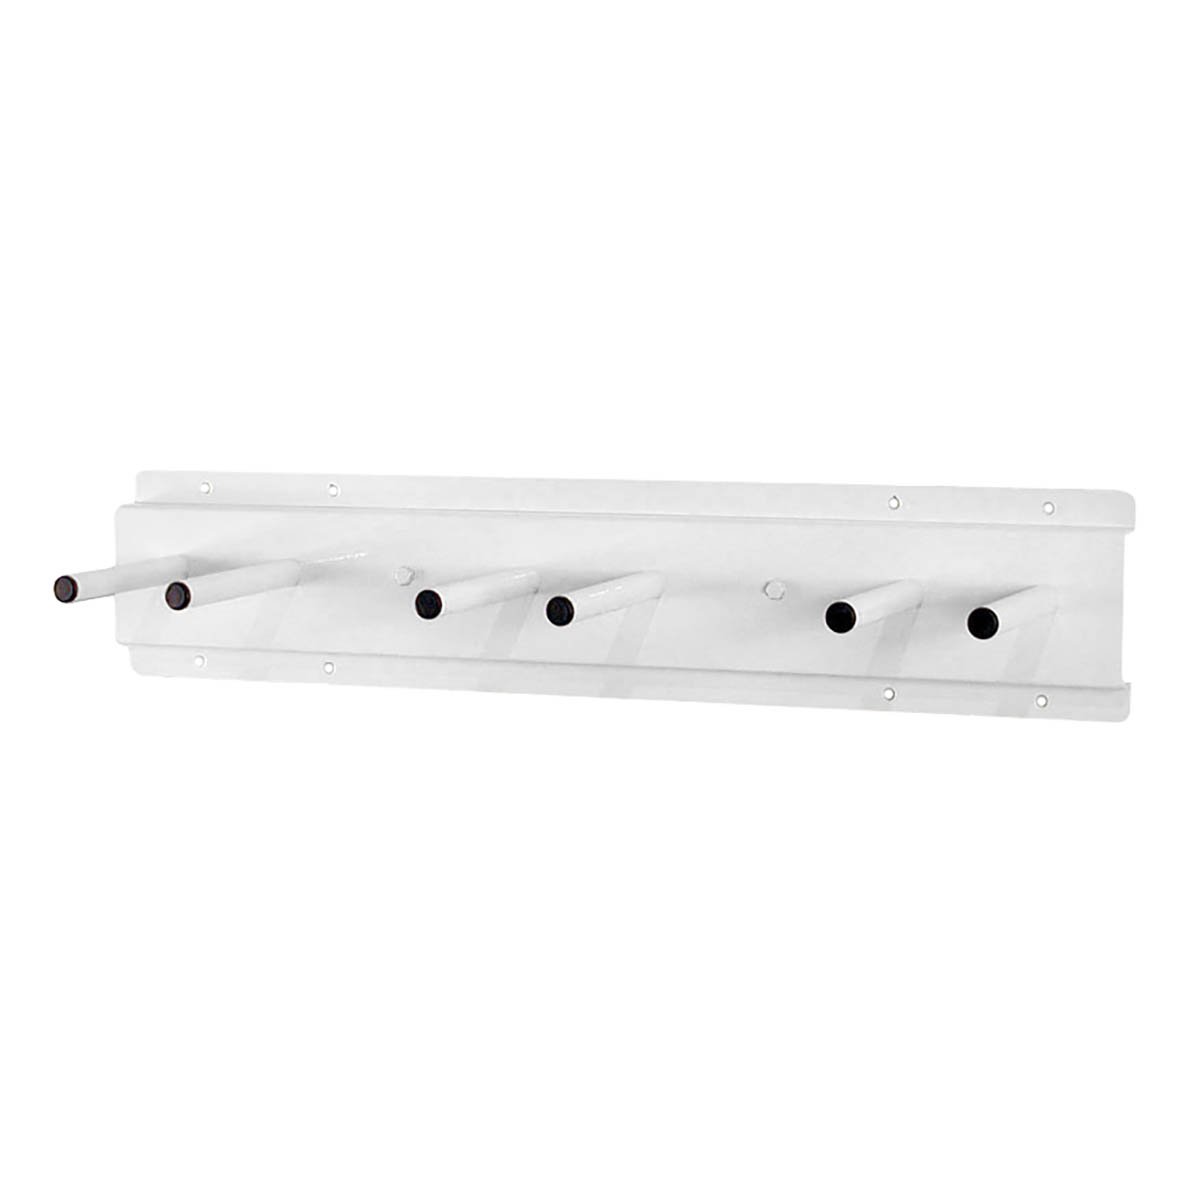 Techno-Aide Wall Mounted Apron Storage Rack with 2, 6, or 8 Pegs